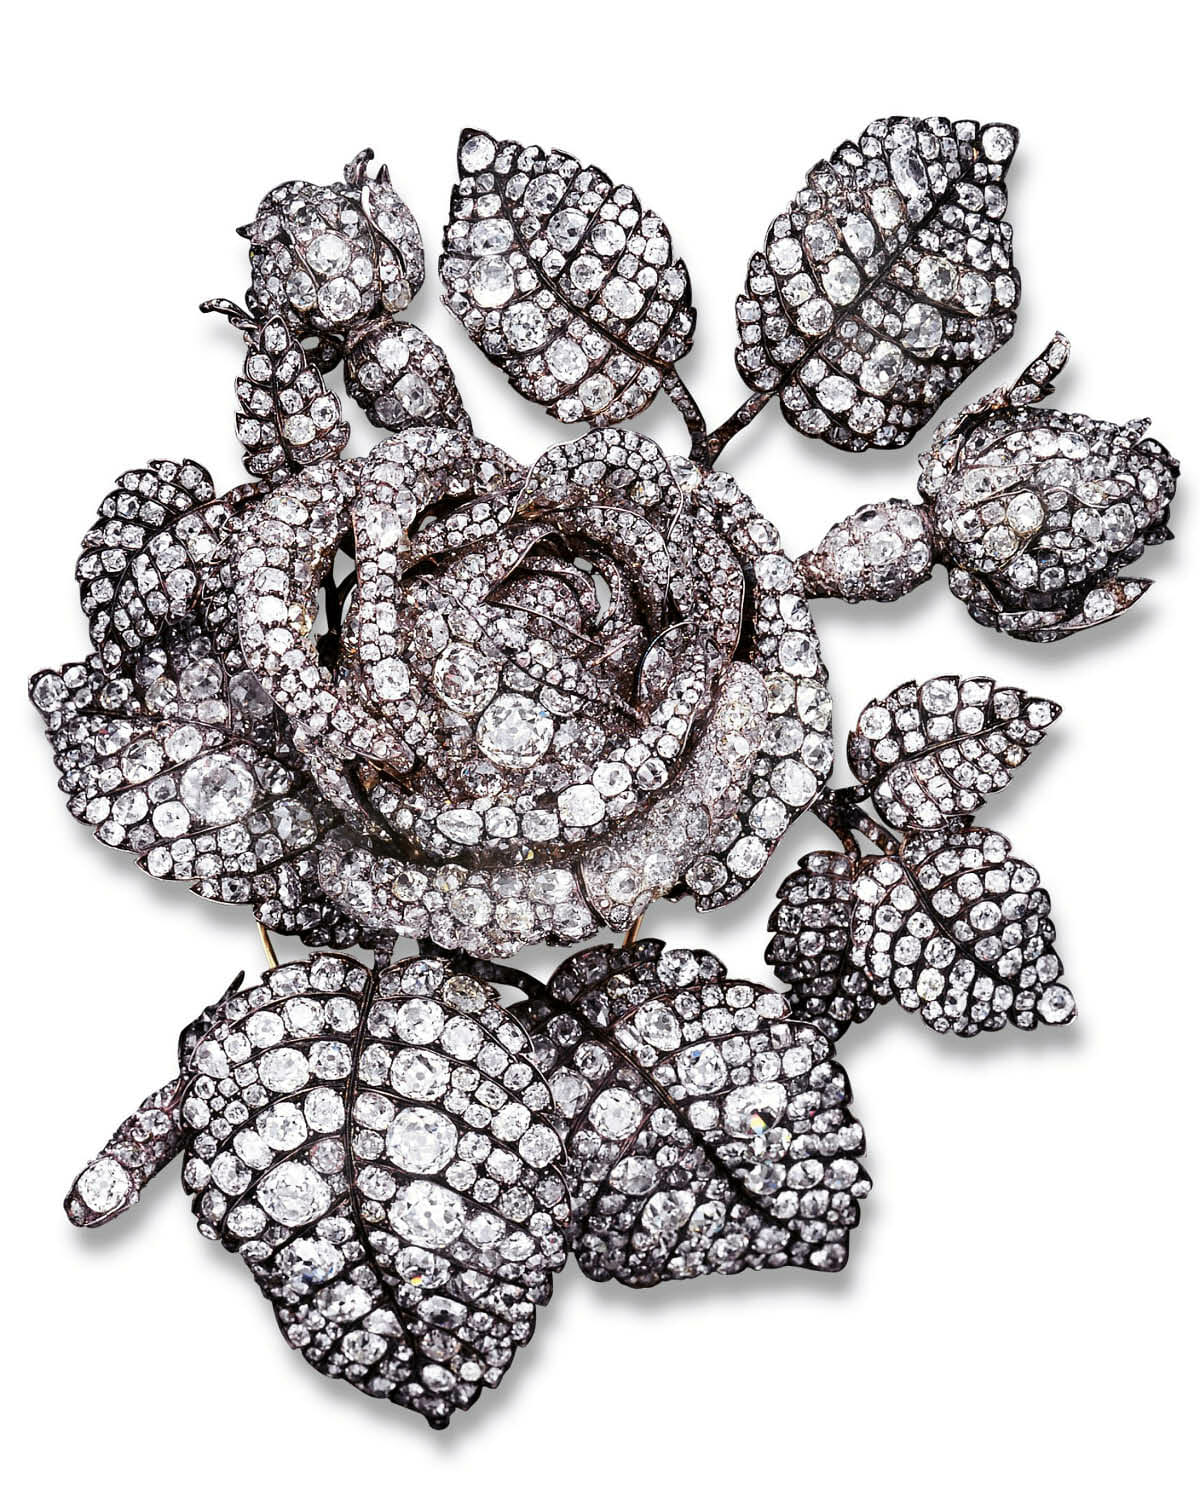 Diamond-studded Stomacher/Corsage brooch from 1864, part of the Al Thani Collection